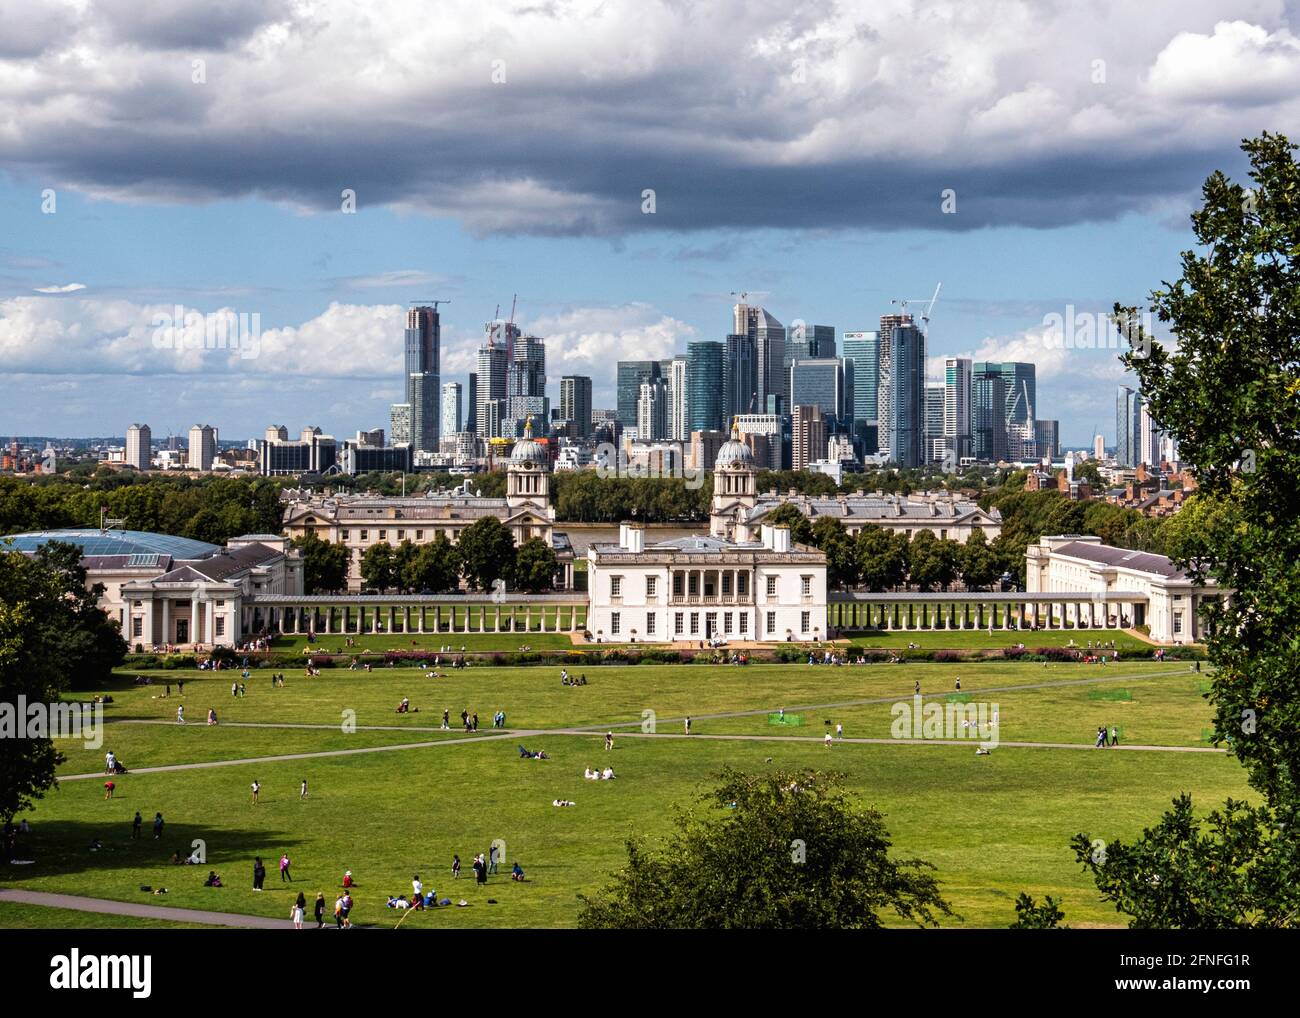 Londra Greenwich.Vista dal parco di Greenwich,Old Royal Naval College, Queen's House & Canary Wharf Banks & financial district su Isle of Dogs Foto Stock